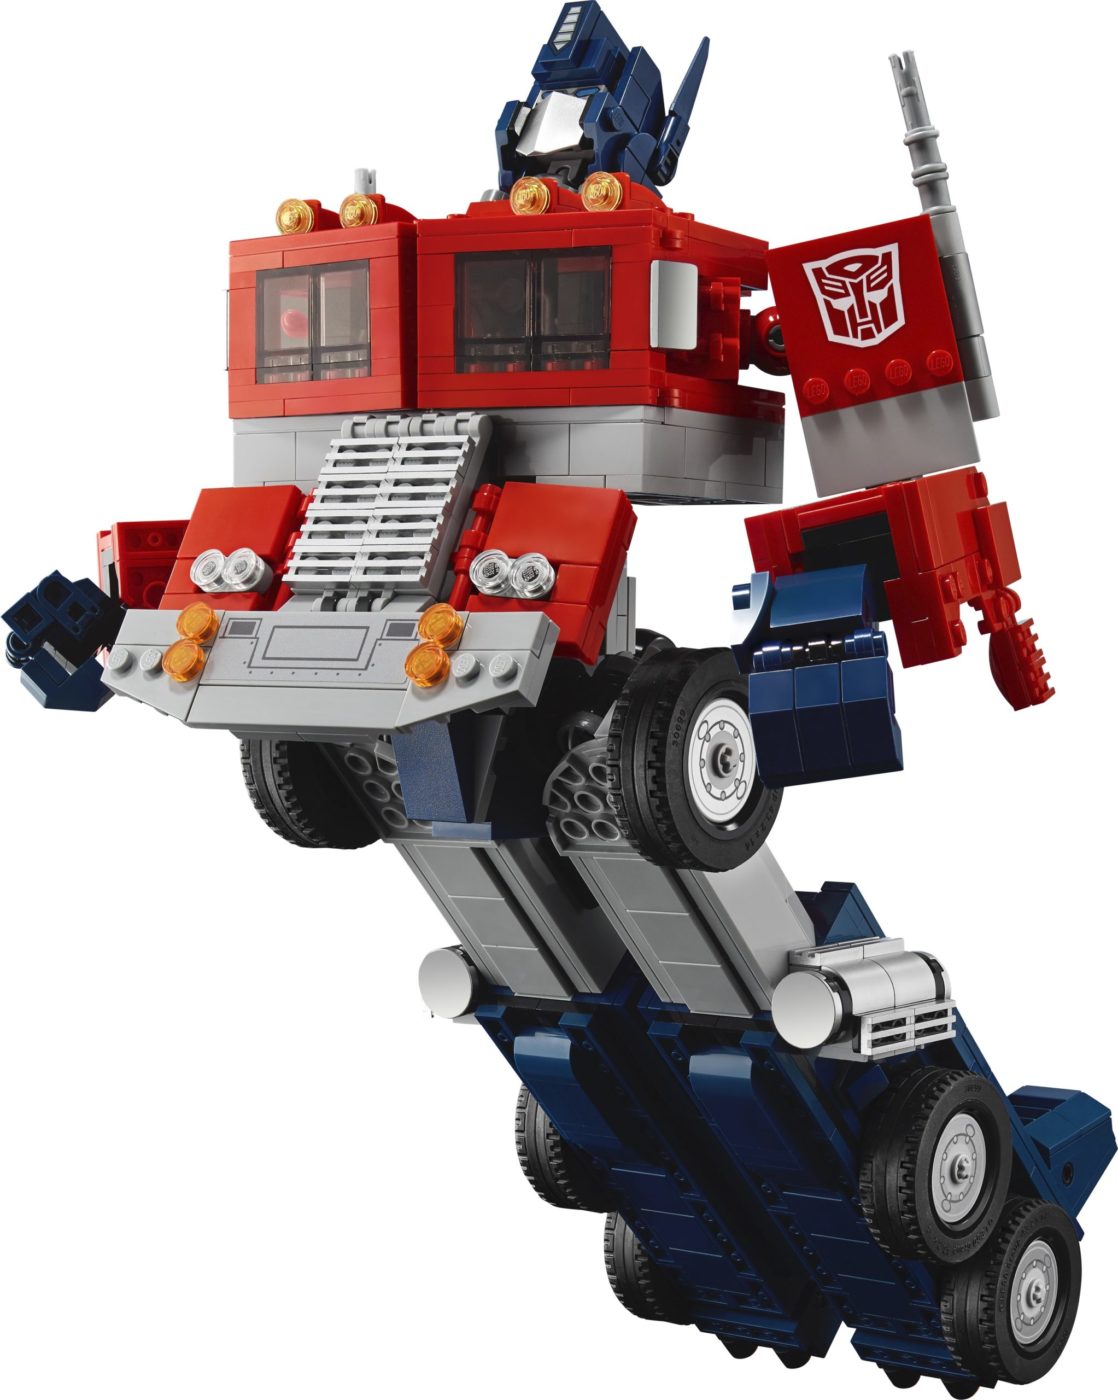 LEGO Transformers 10302 Optimus Prime officially revealed 